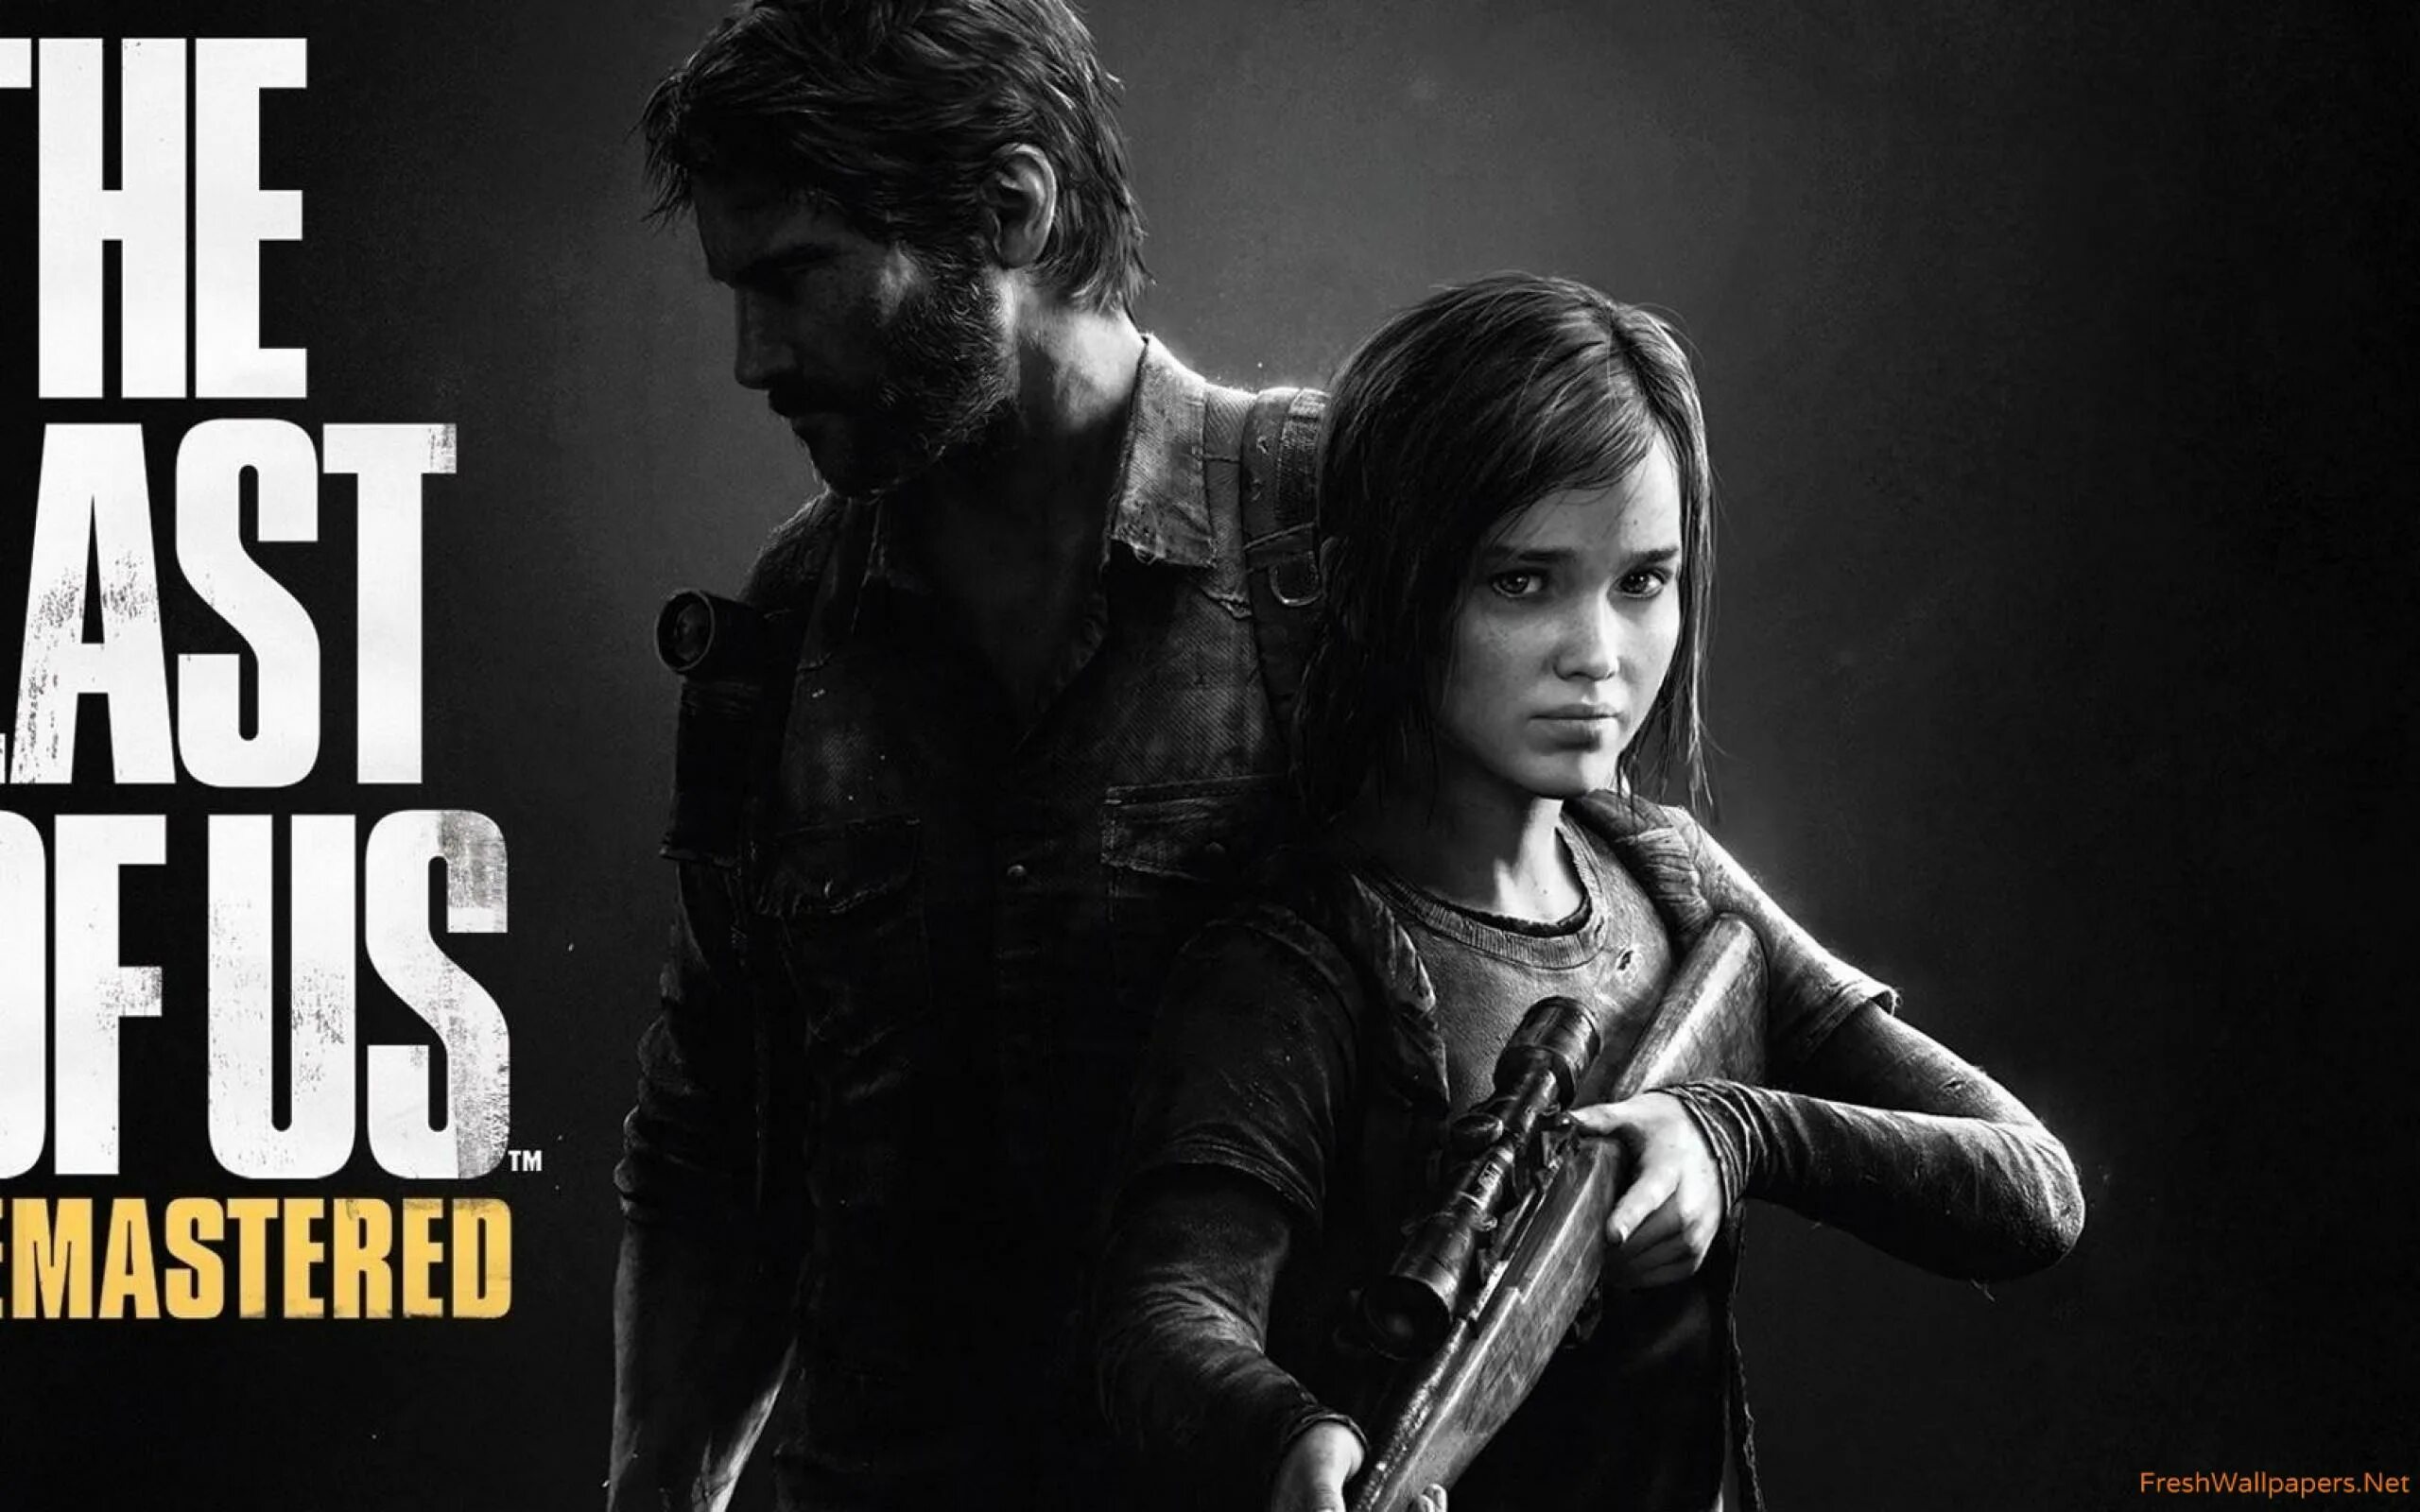 In the last two months. The last of us. The last of us игра. Ласт оф АС 1.